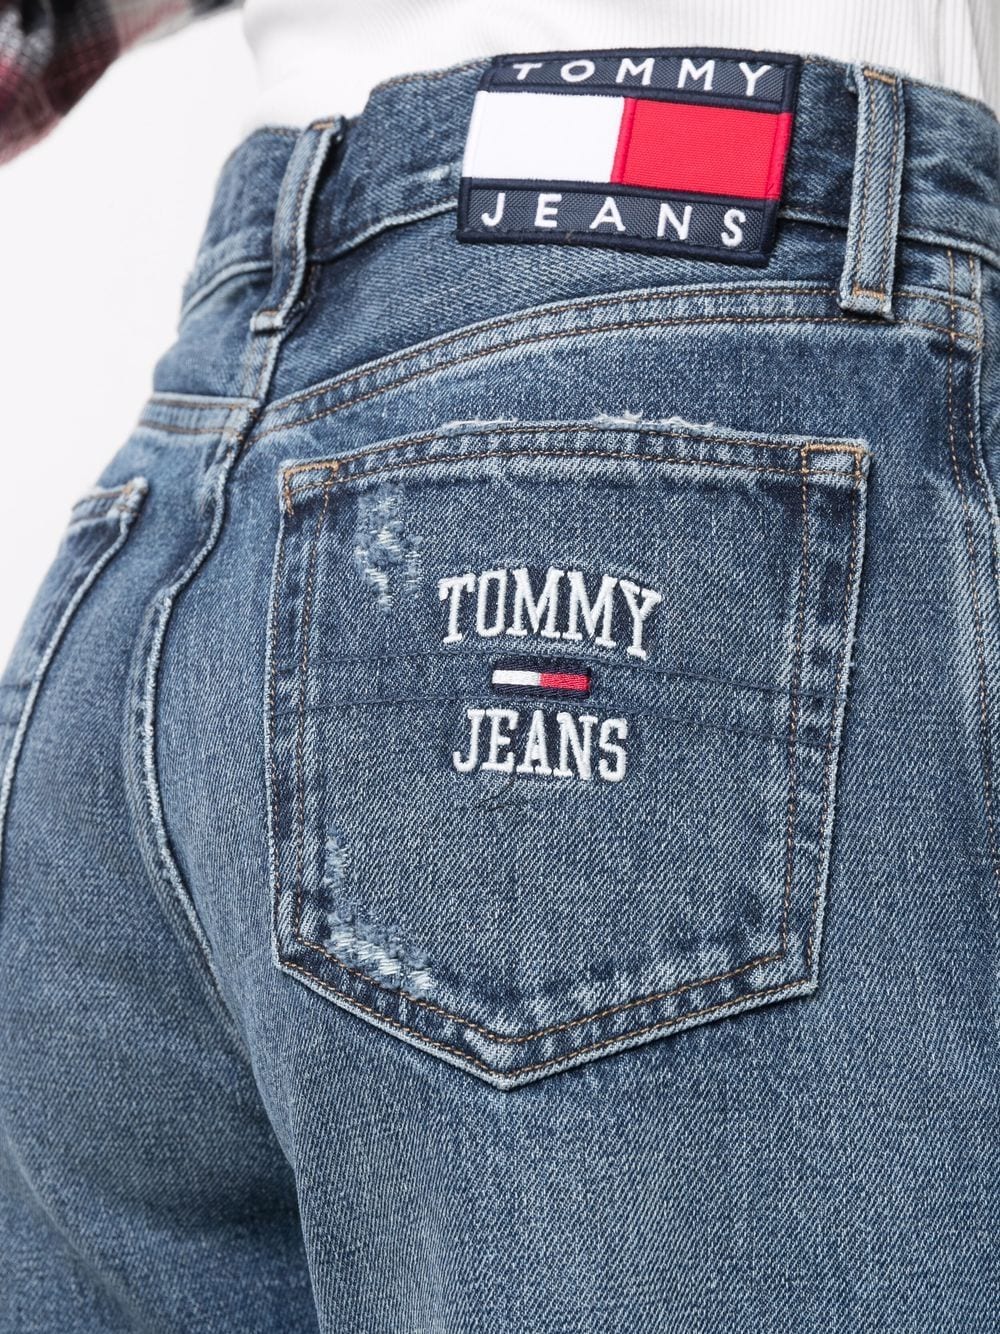 Detail - Jeans Jeans Tommy Farfetch embroidered-logo